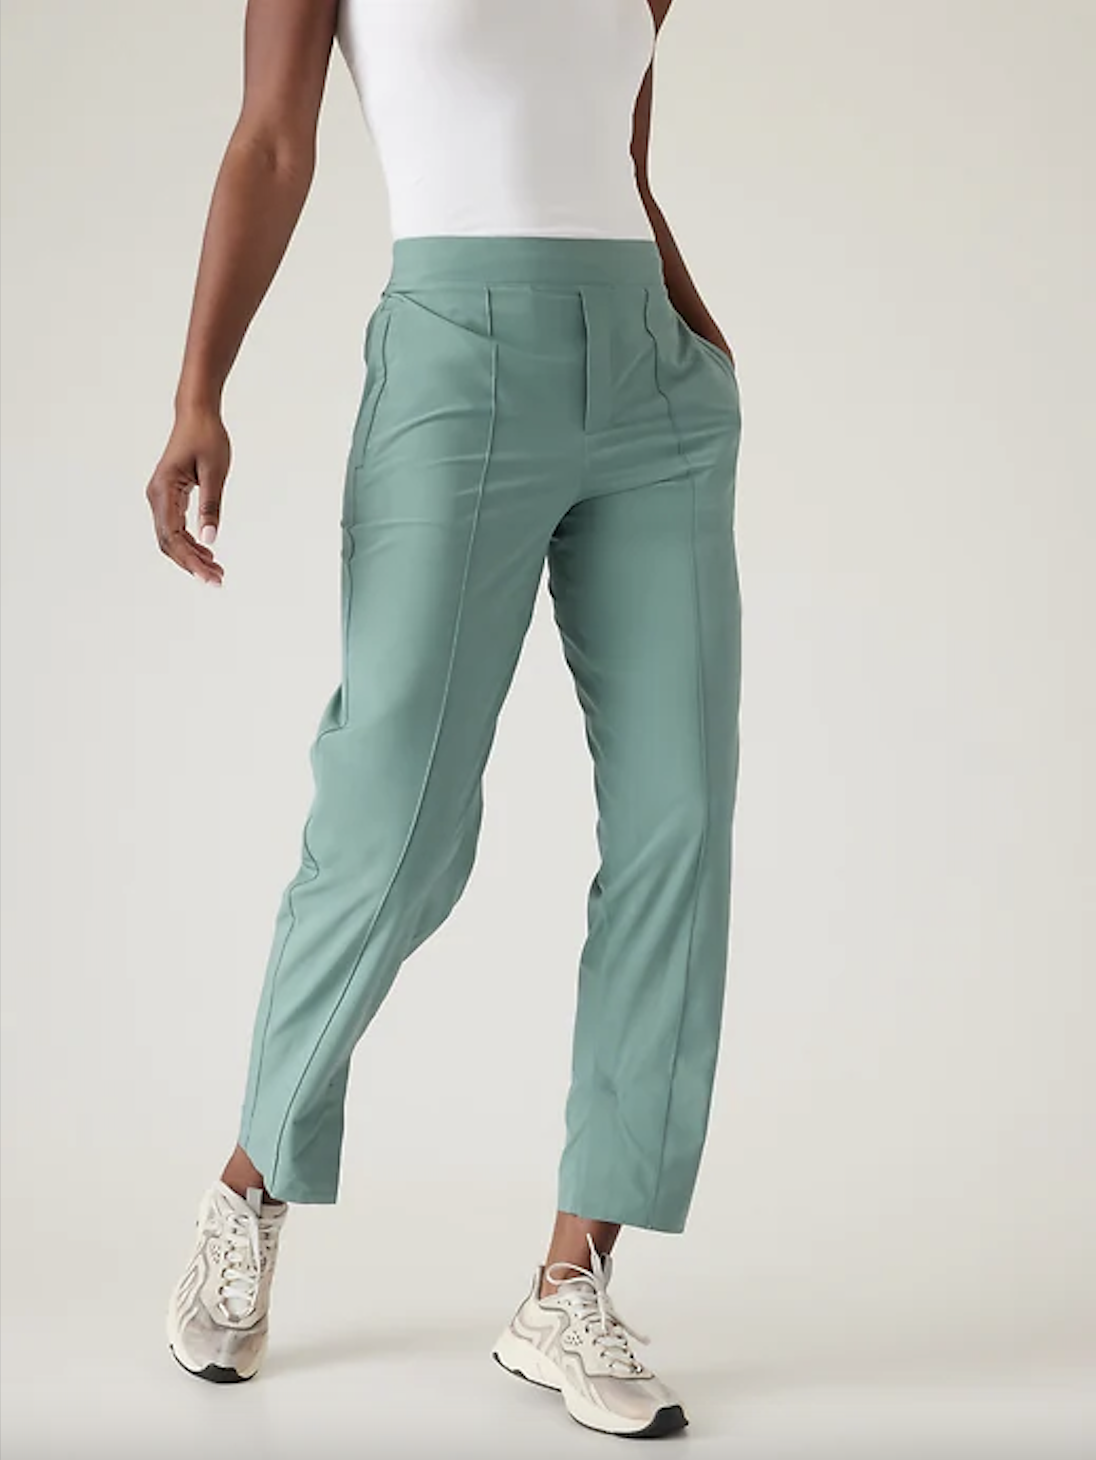 best work pants for women  pants for the workplace  40style